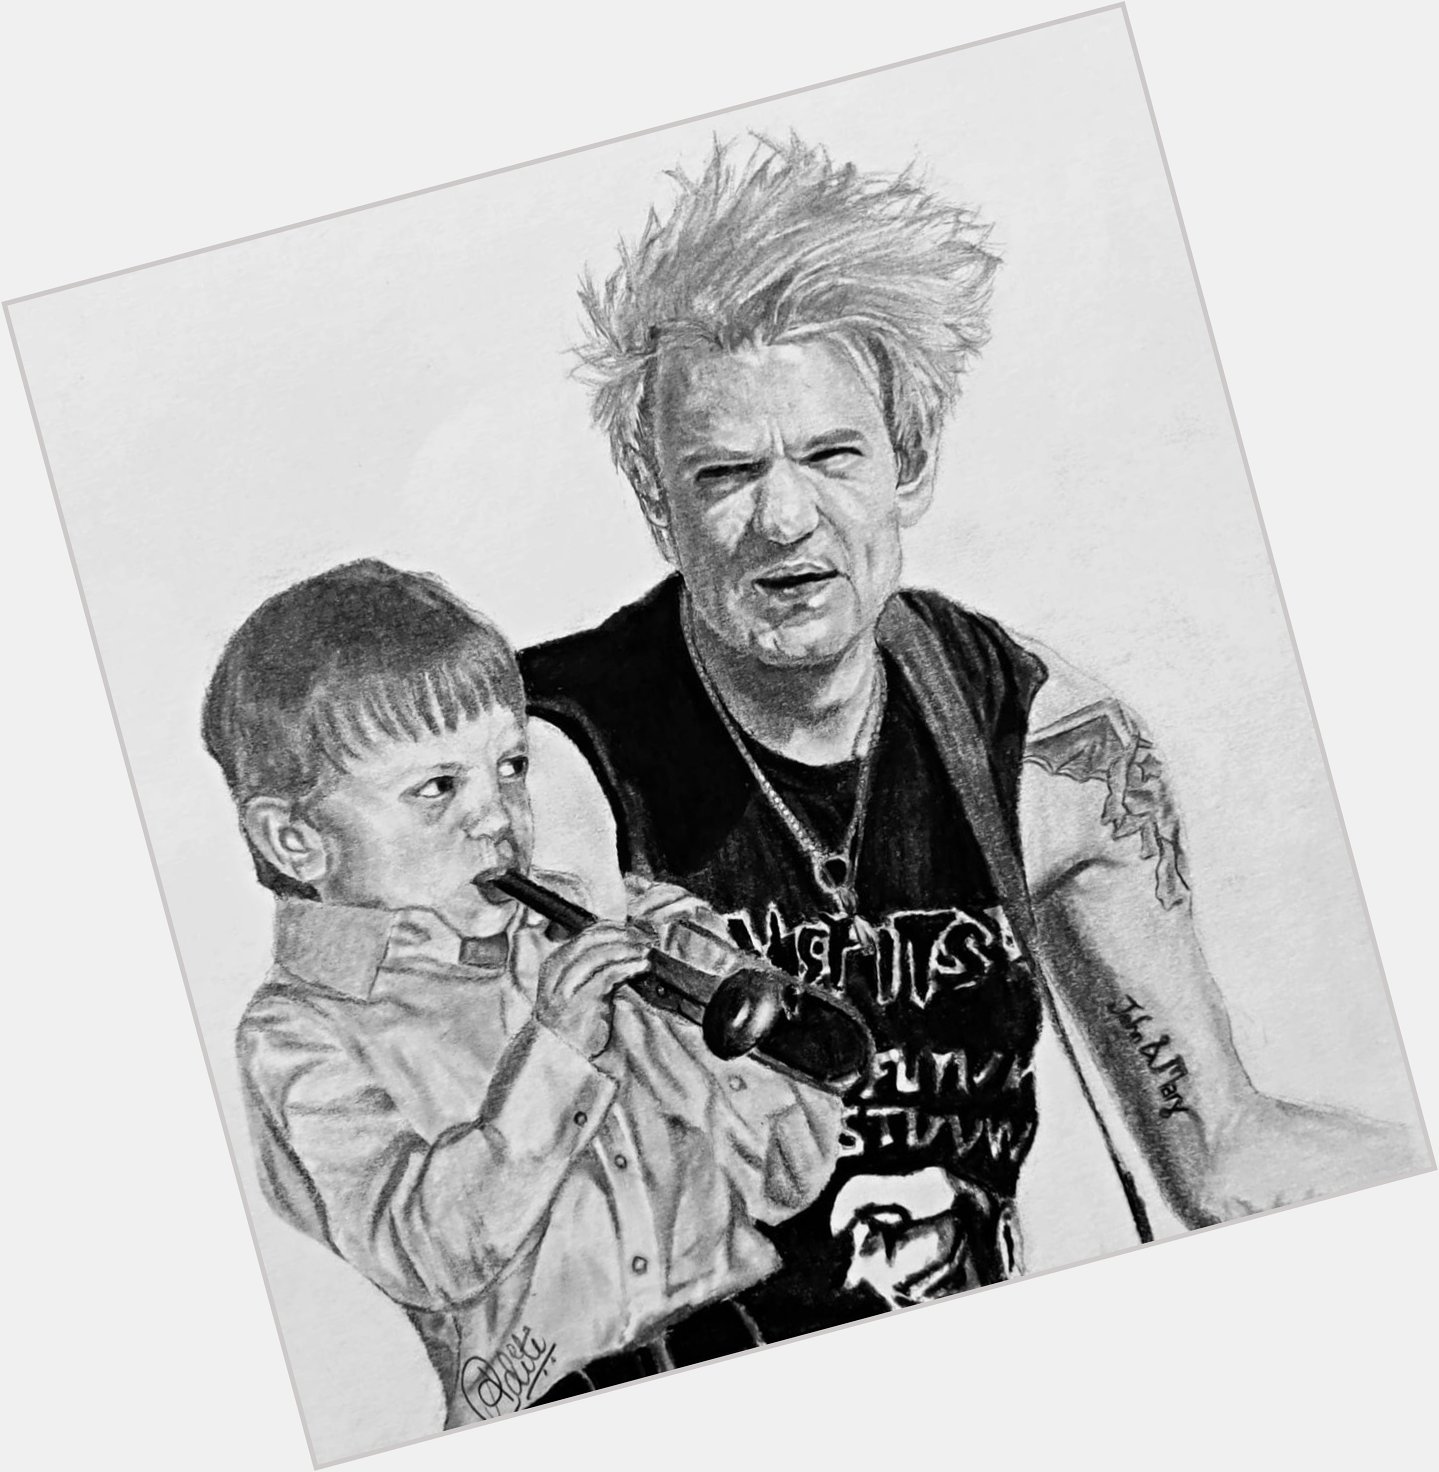 Happy birthday Deryck Whibley!!
This is just a small sketch I did for him.    